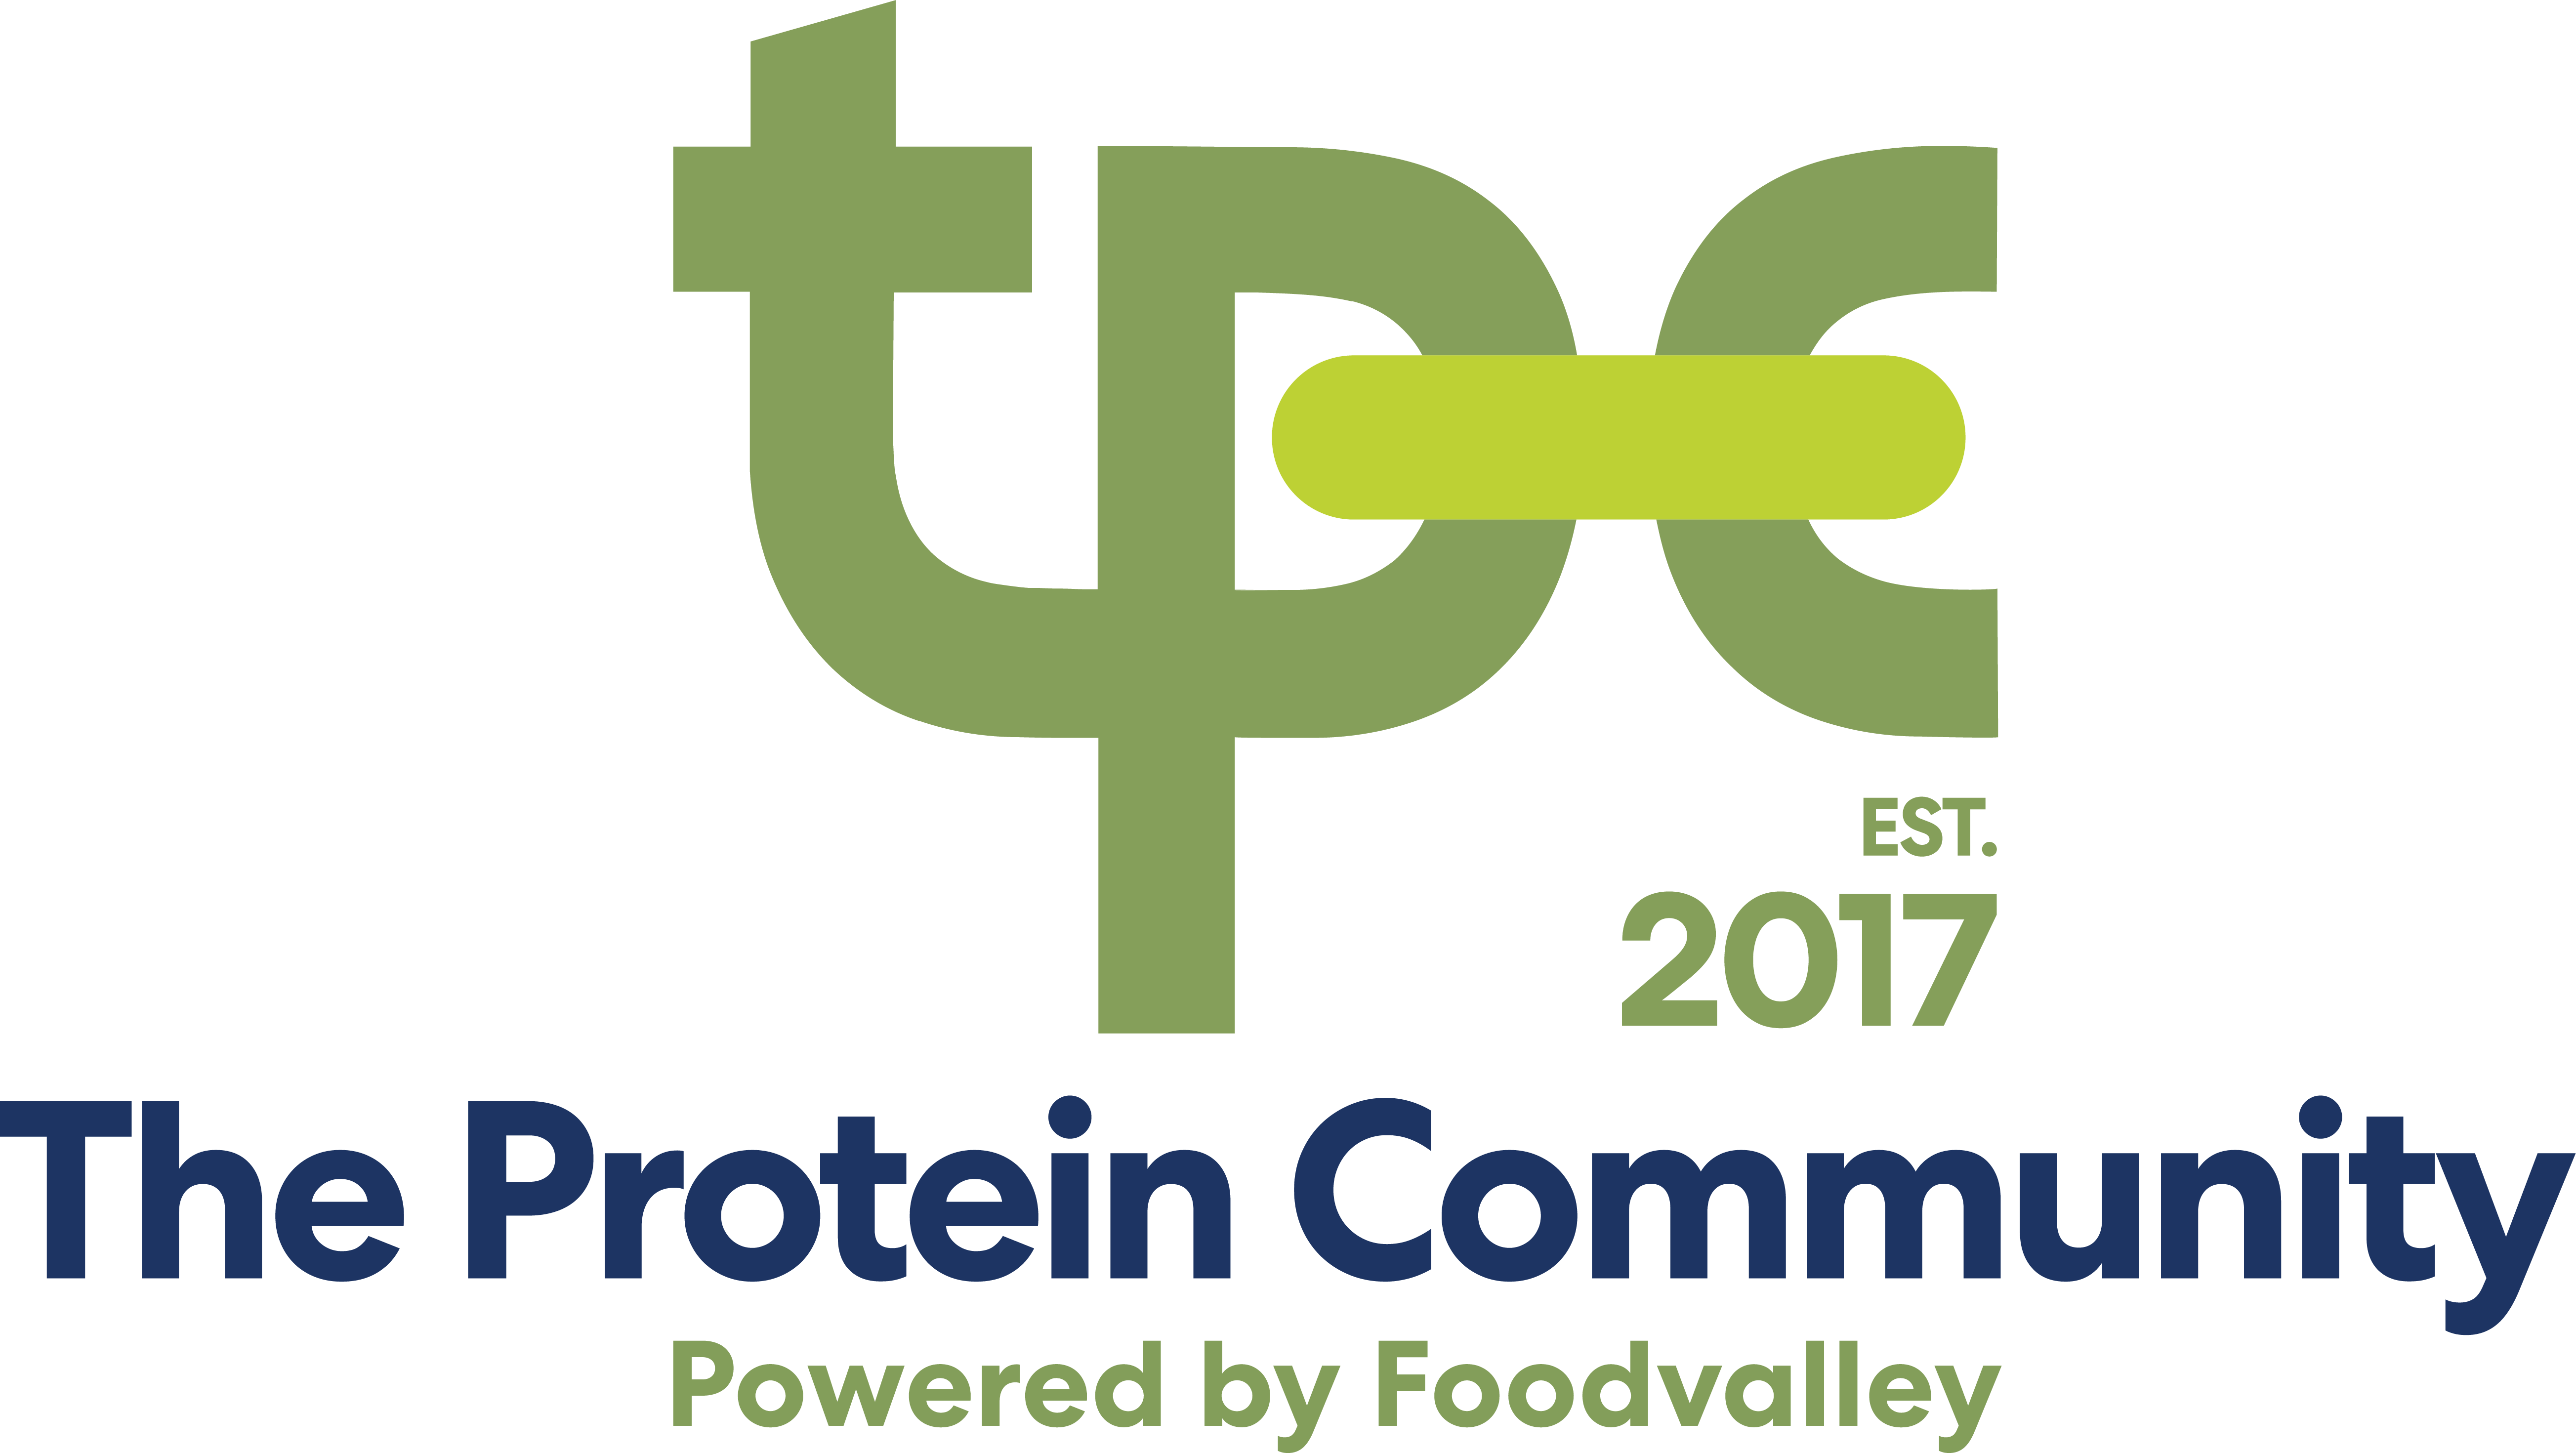 The Protein Community